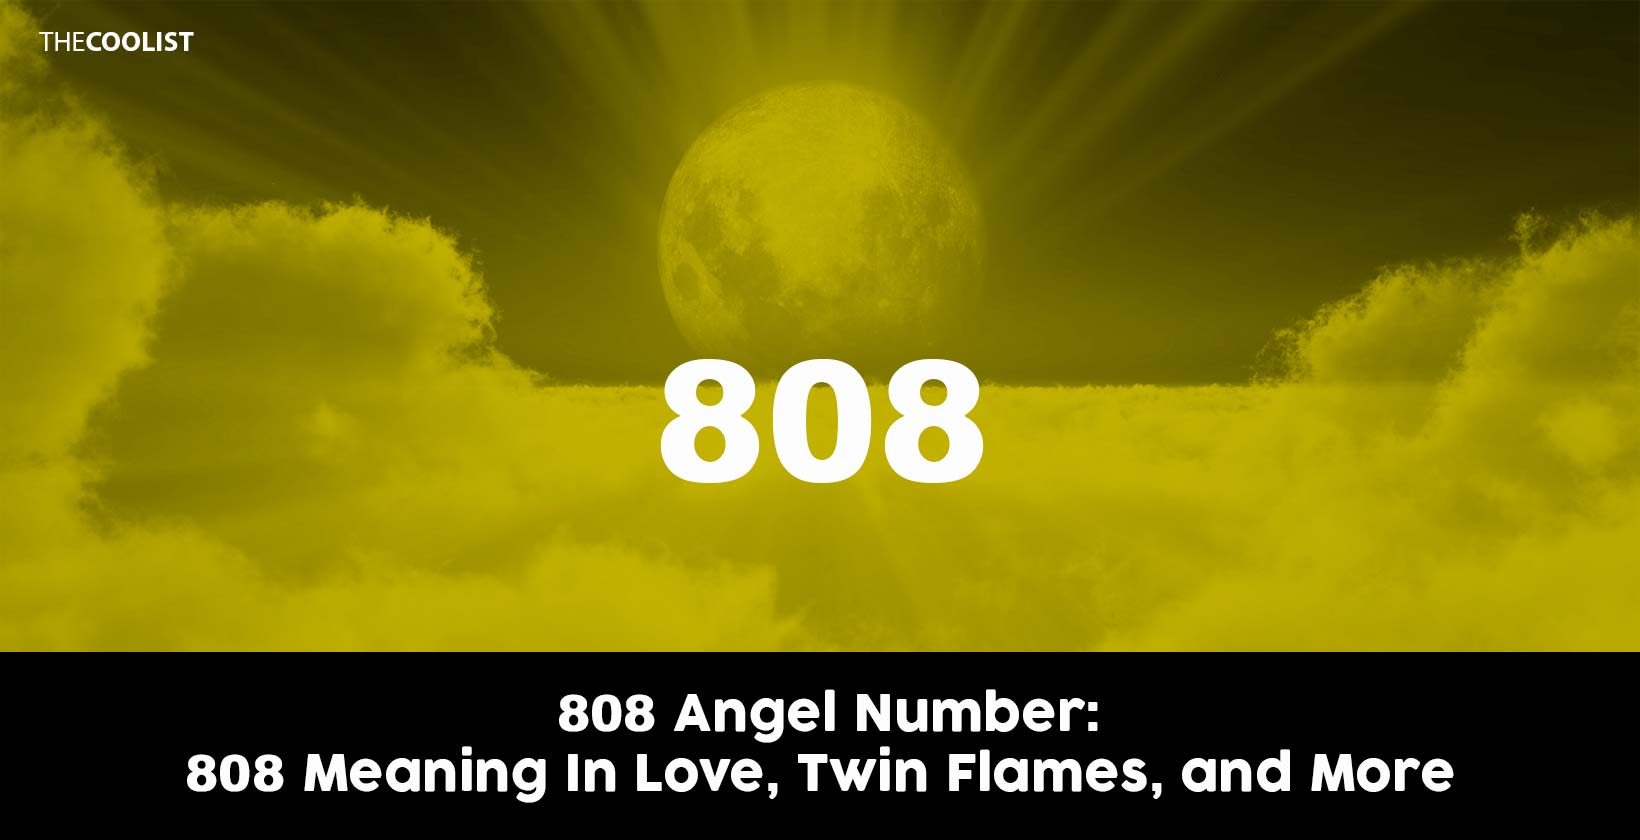 808 Angel Number: Meaning in Love, Twin Flames, and More